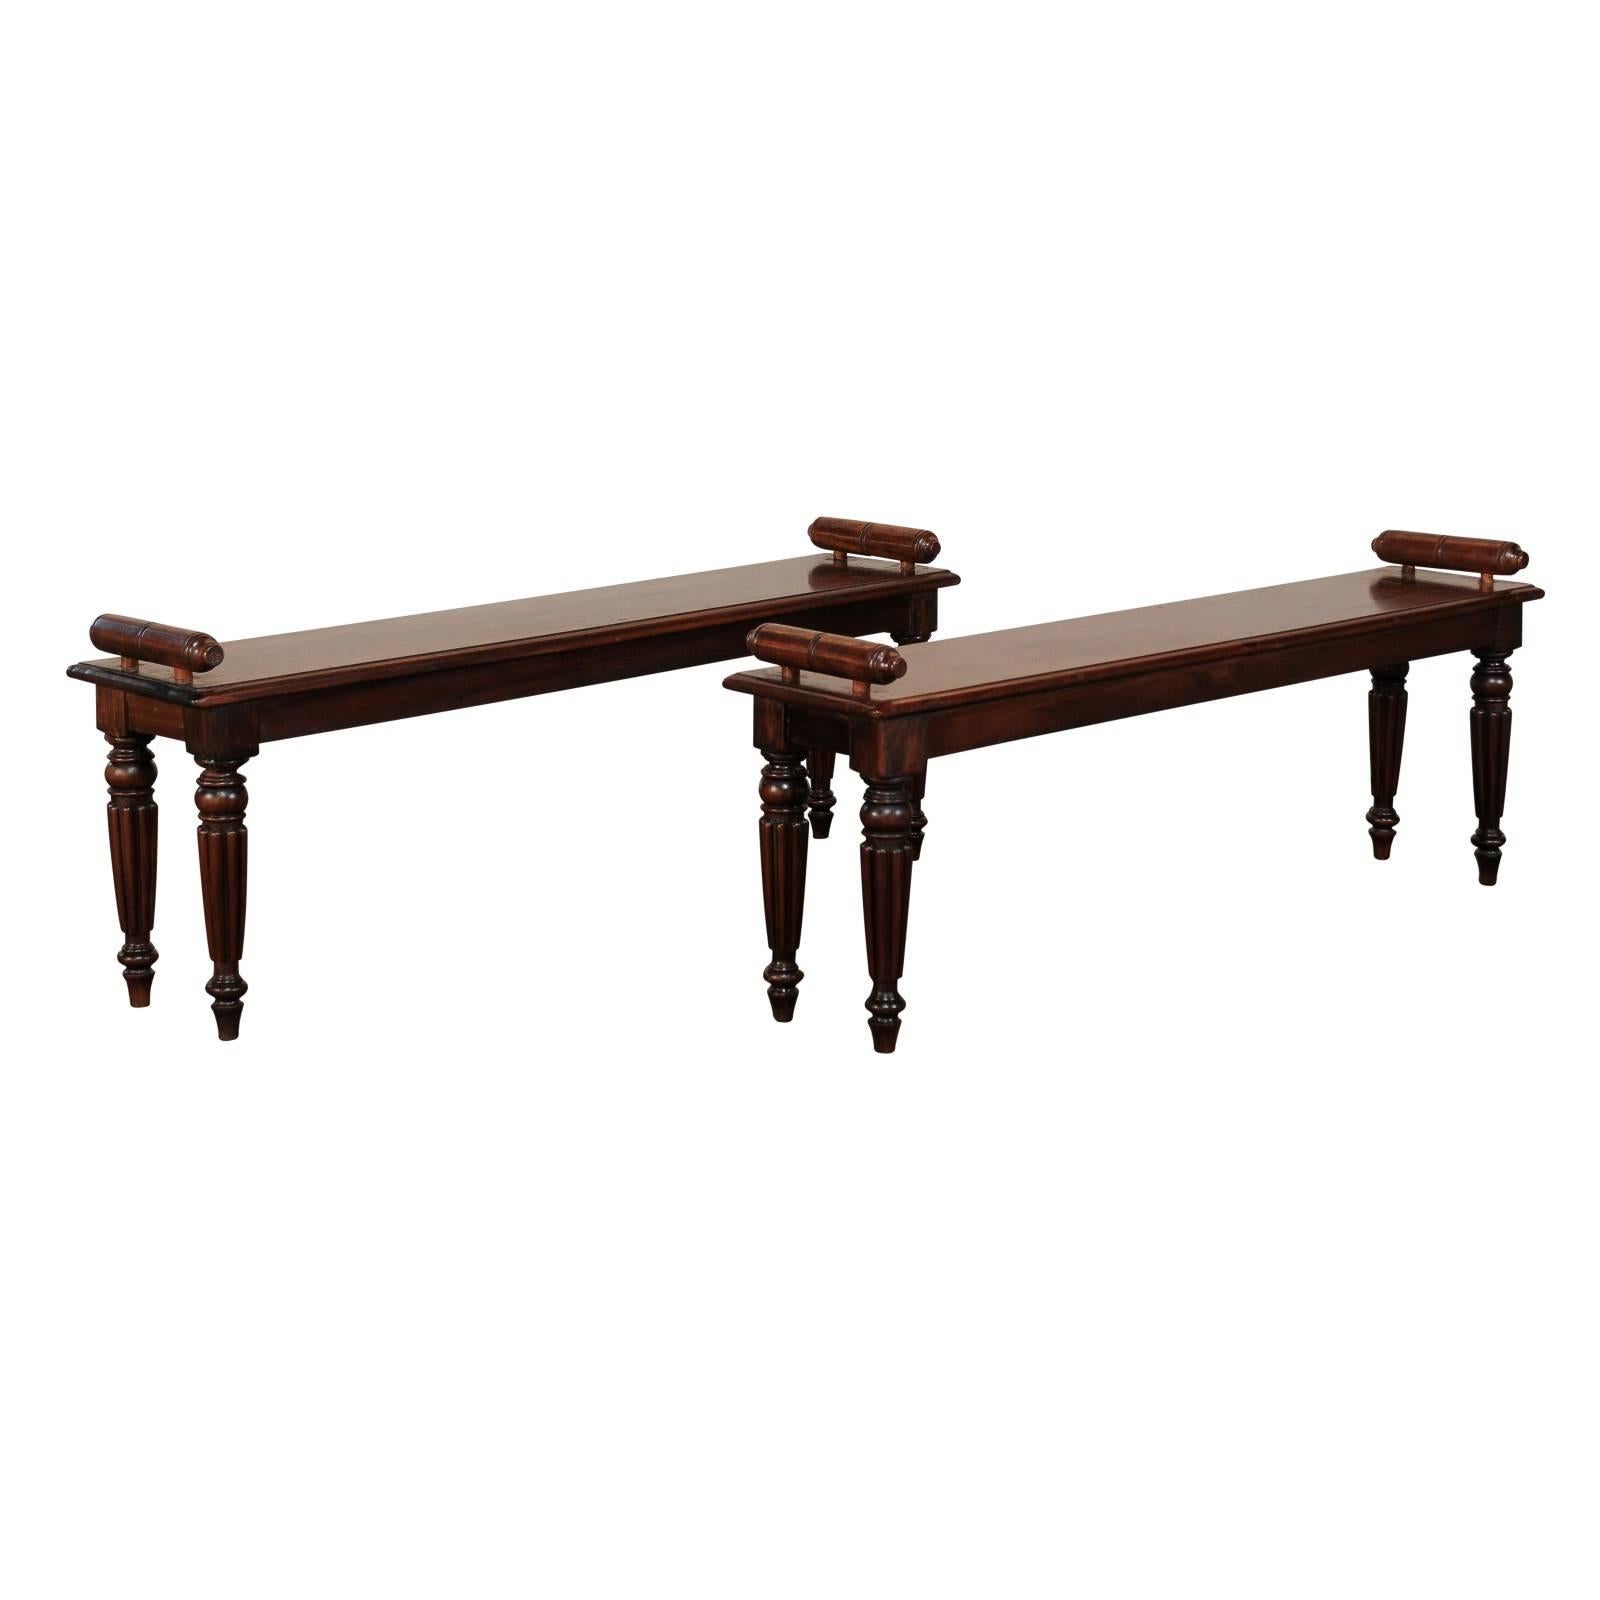 Pair of 19th Century English Regency Style Hall Benches